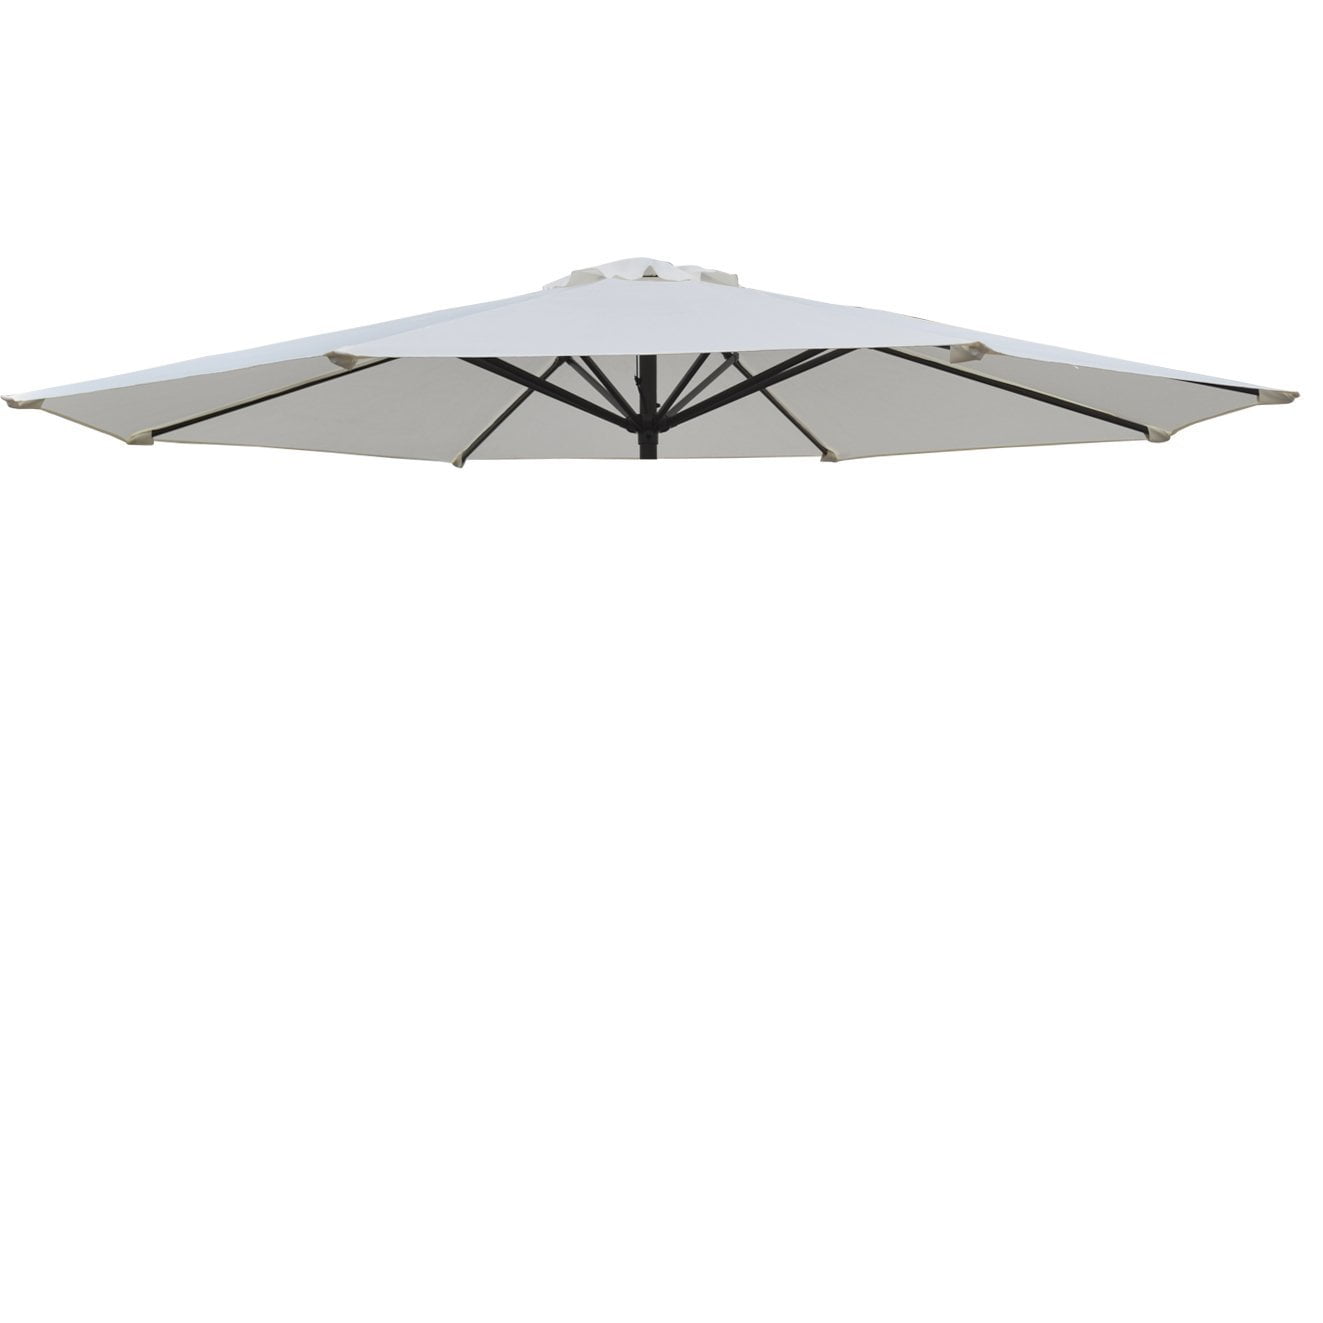 Replacement Patio Umbrella Canopy Cover for 9ft 8 Ribs ...